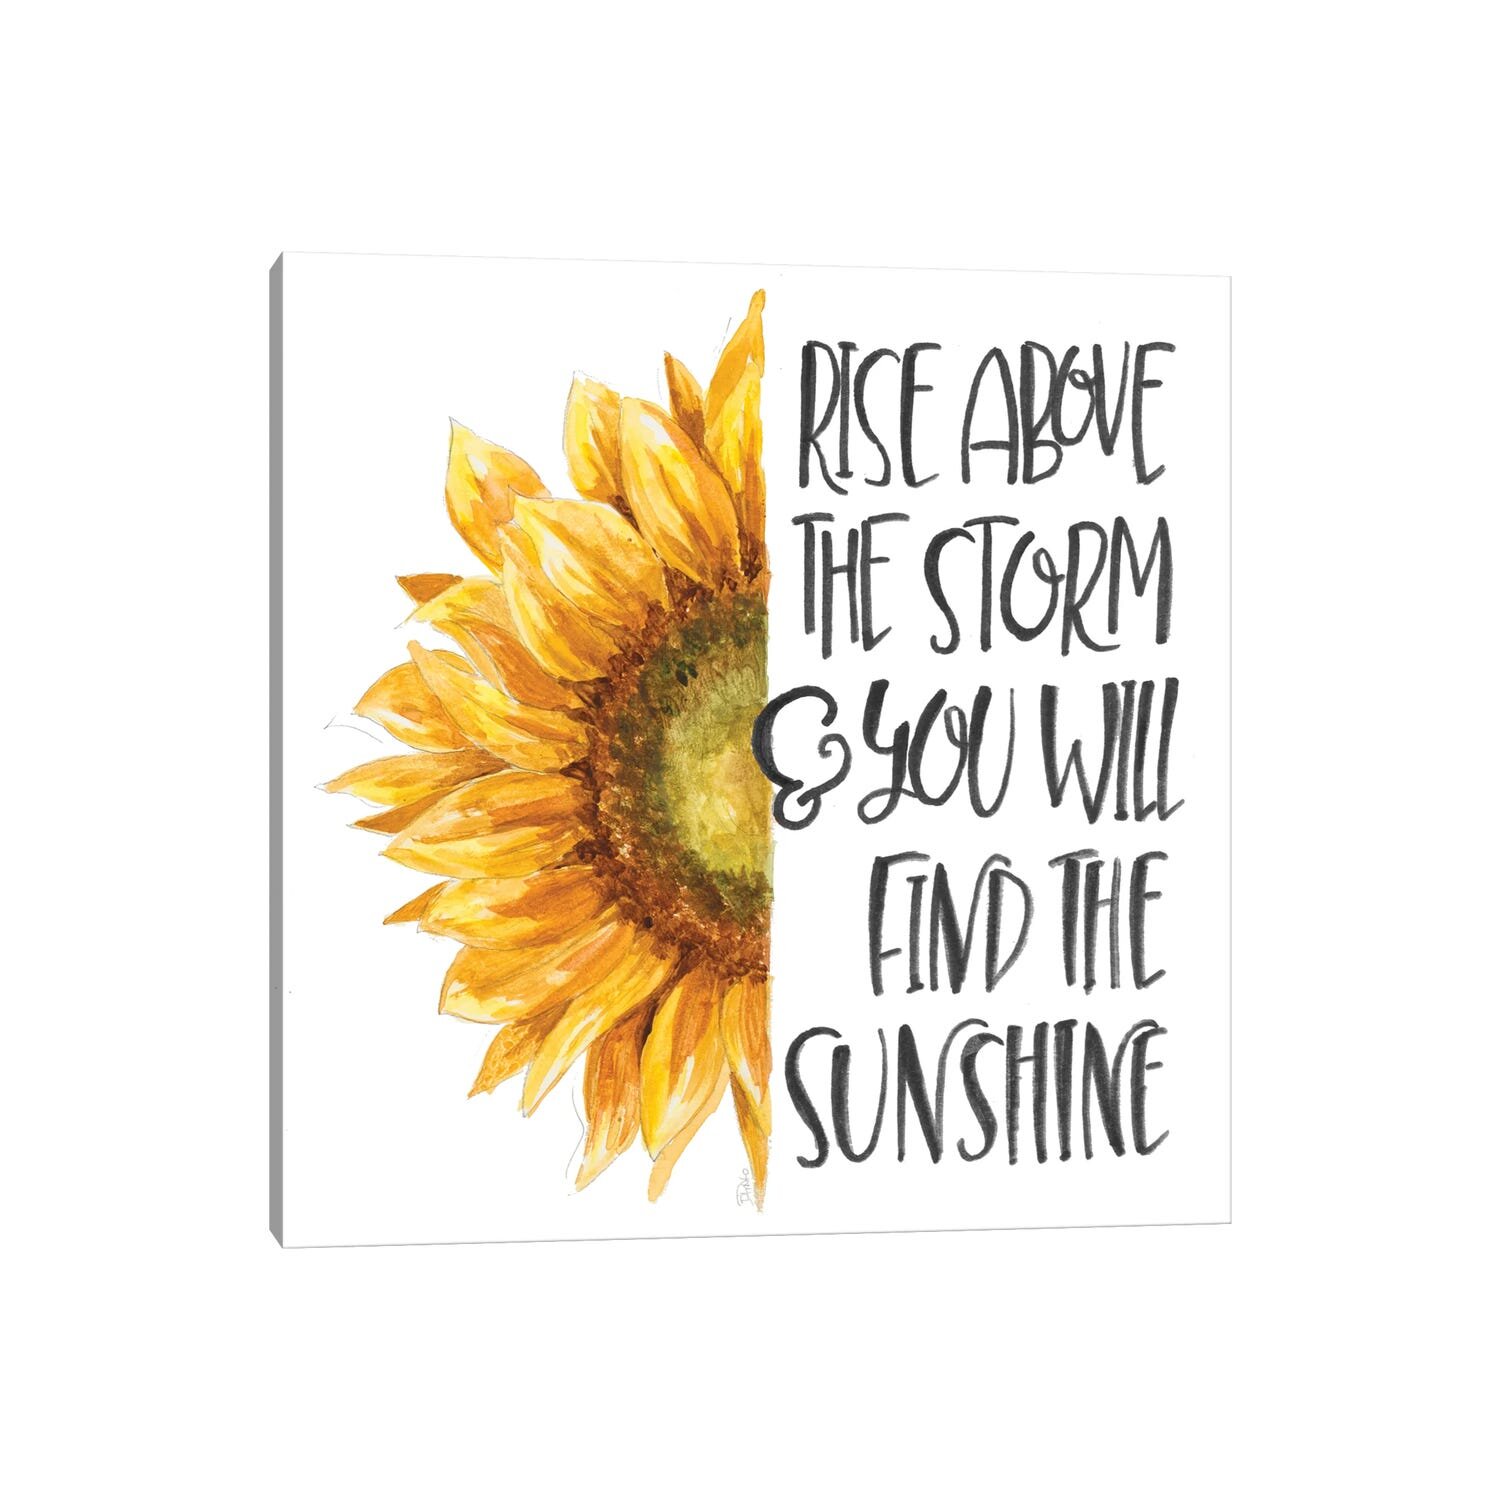 Small Square Canvas Painting Ideas  Painting, Sunflower painting, Small  canvas art